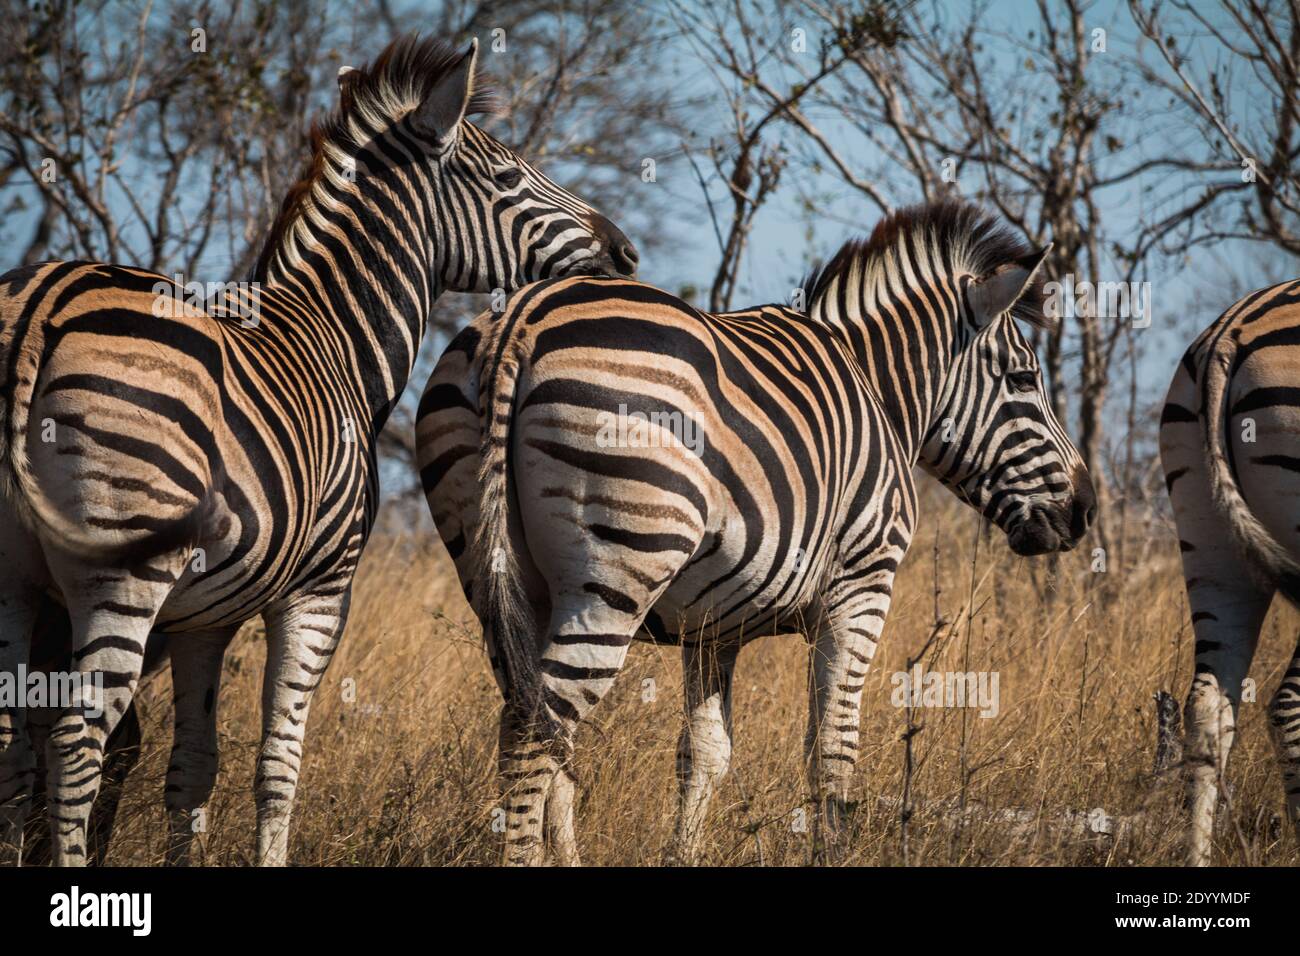 A herd of zebras standing close together in South Africa Stock Photo